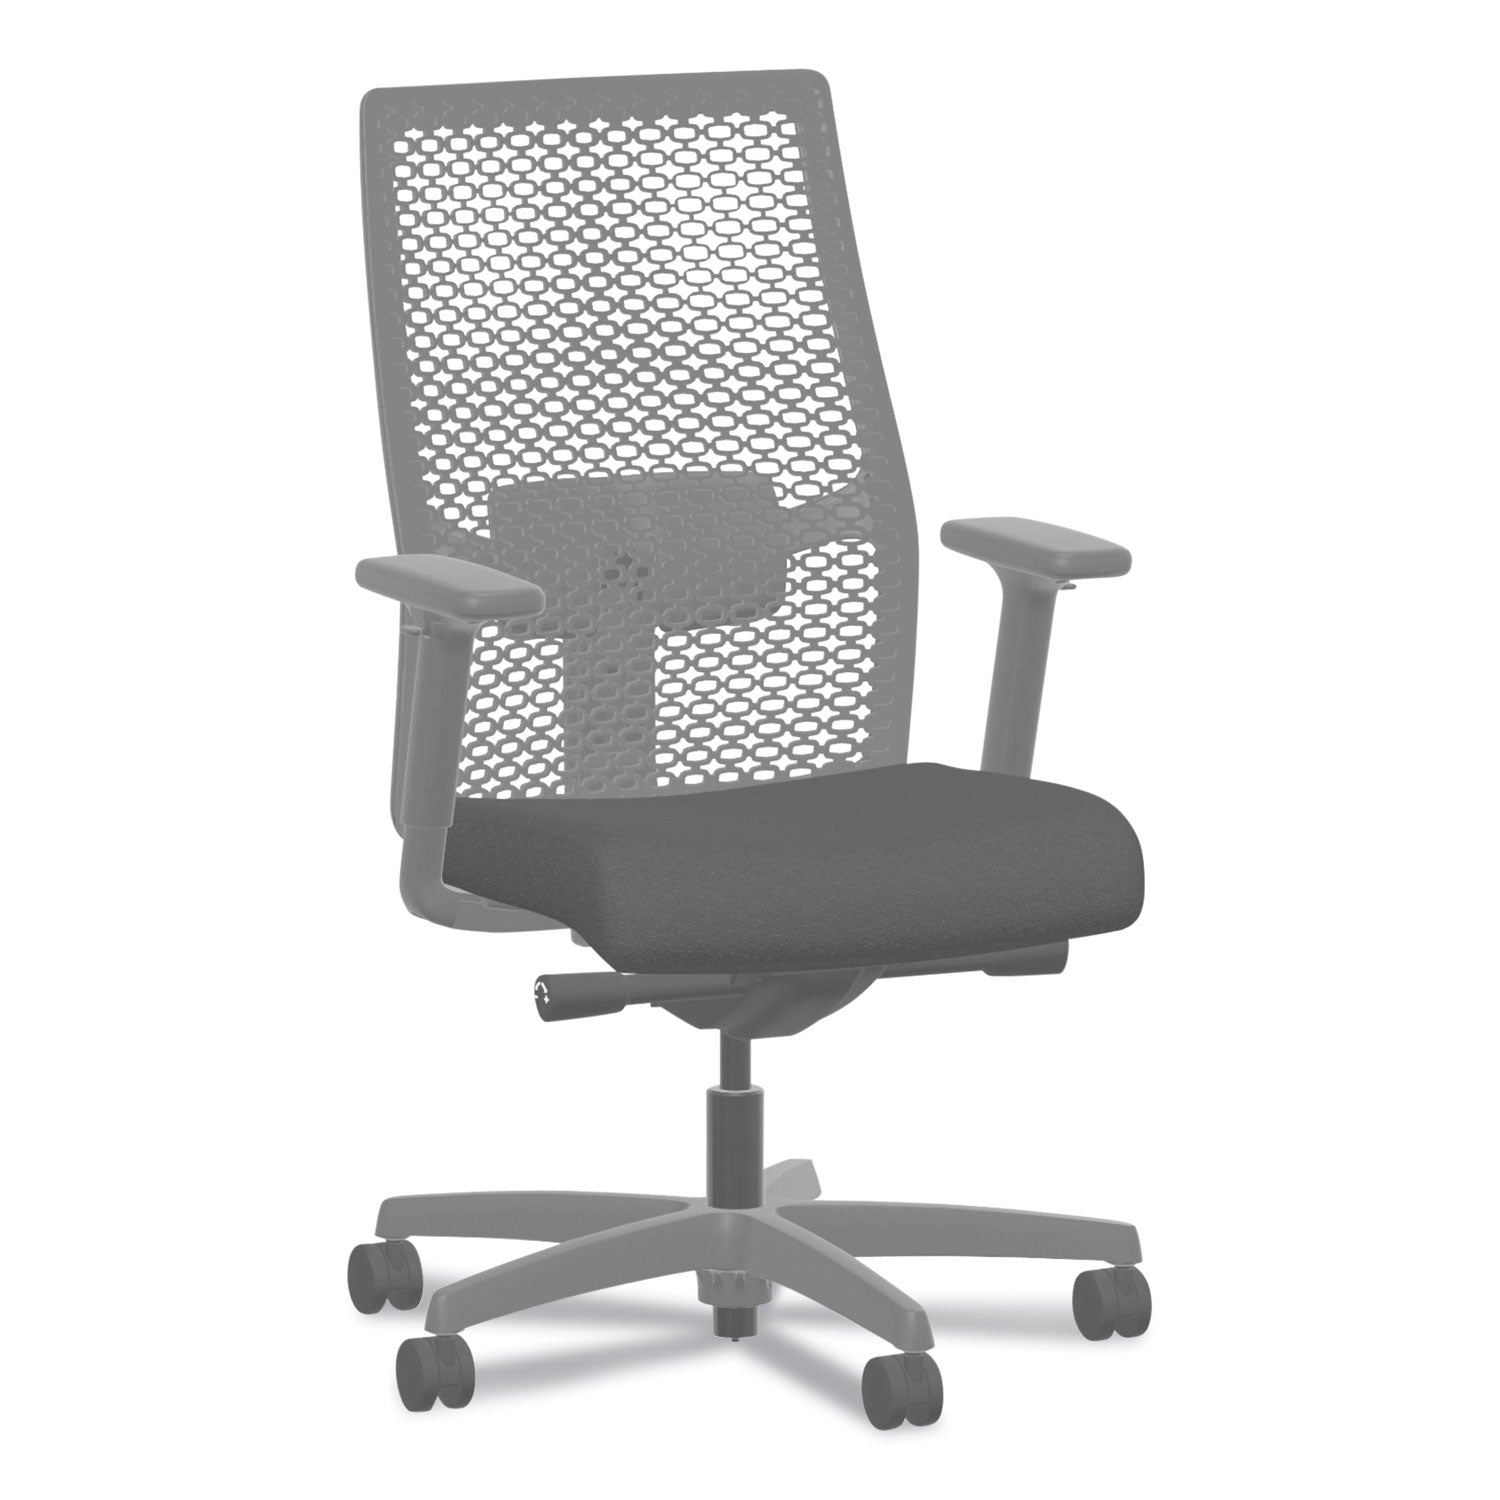 ignition-20-reactiv-mid-back-task-chair-1725-to-2175-seat-height-black-fabric-seat-black-back-ships-in-7-10-bus-days_honi2mrl2bc10tk - 1